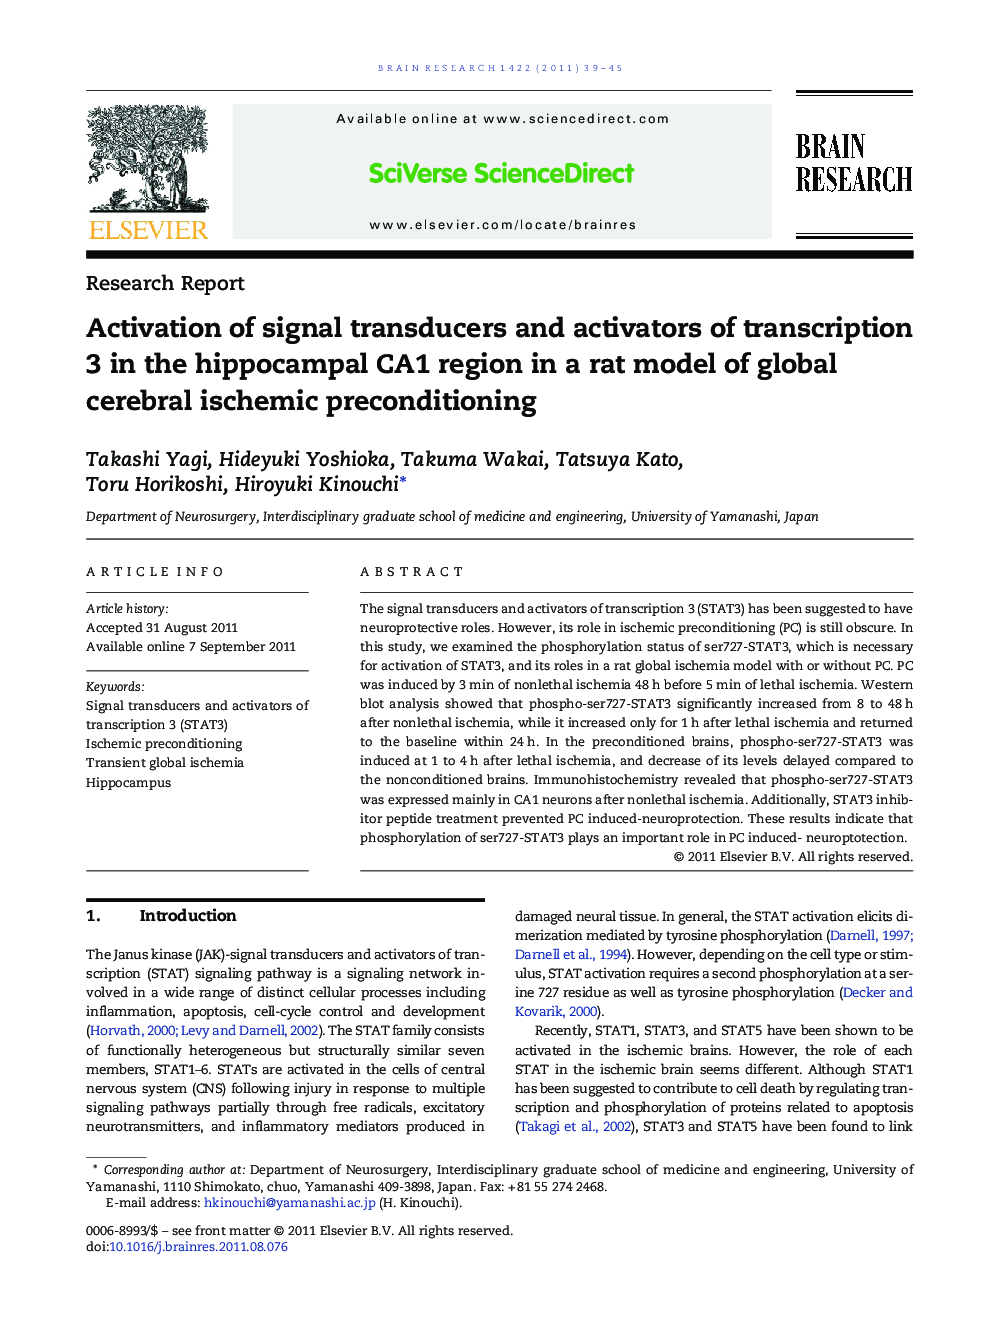 Activation of signal transducers and activators of transcription 3 in the hippocampal CA1 region in a rat model of global cerebral ischemic preconditioning